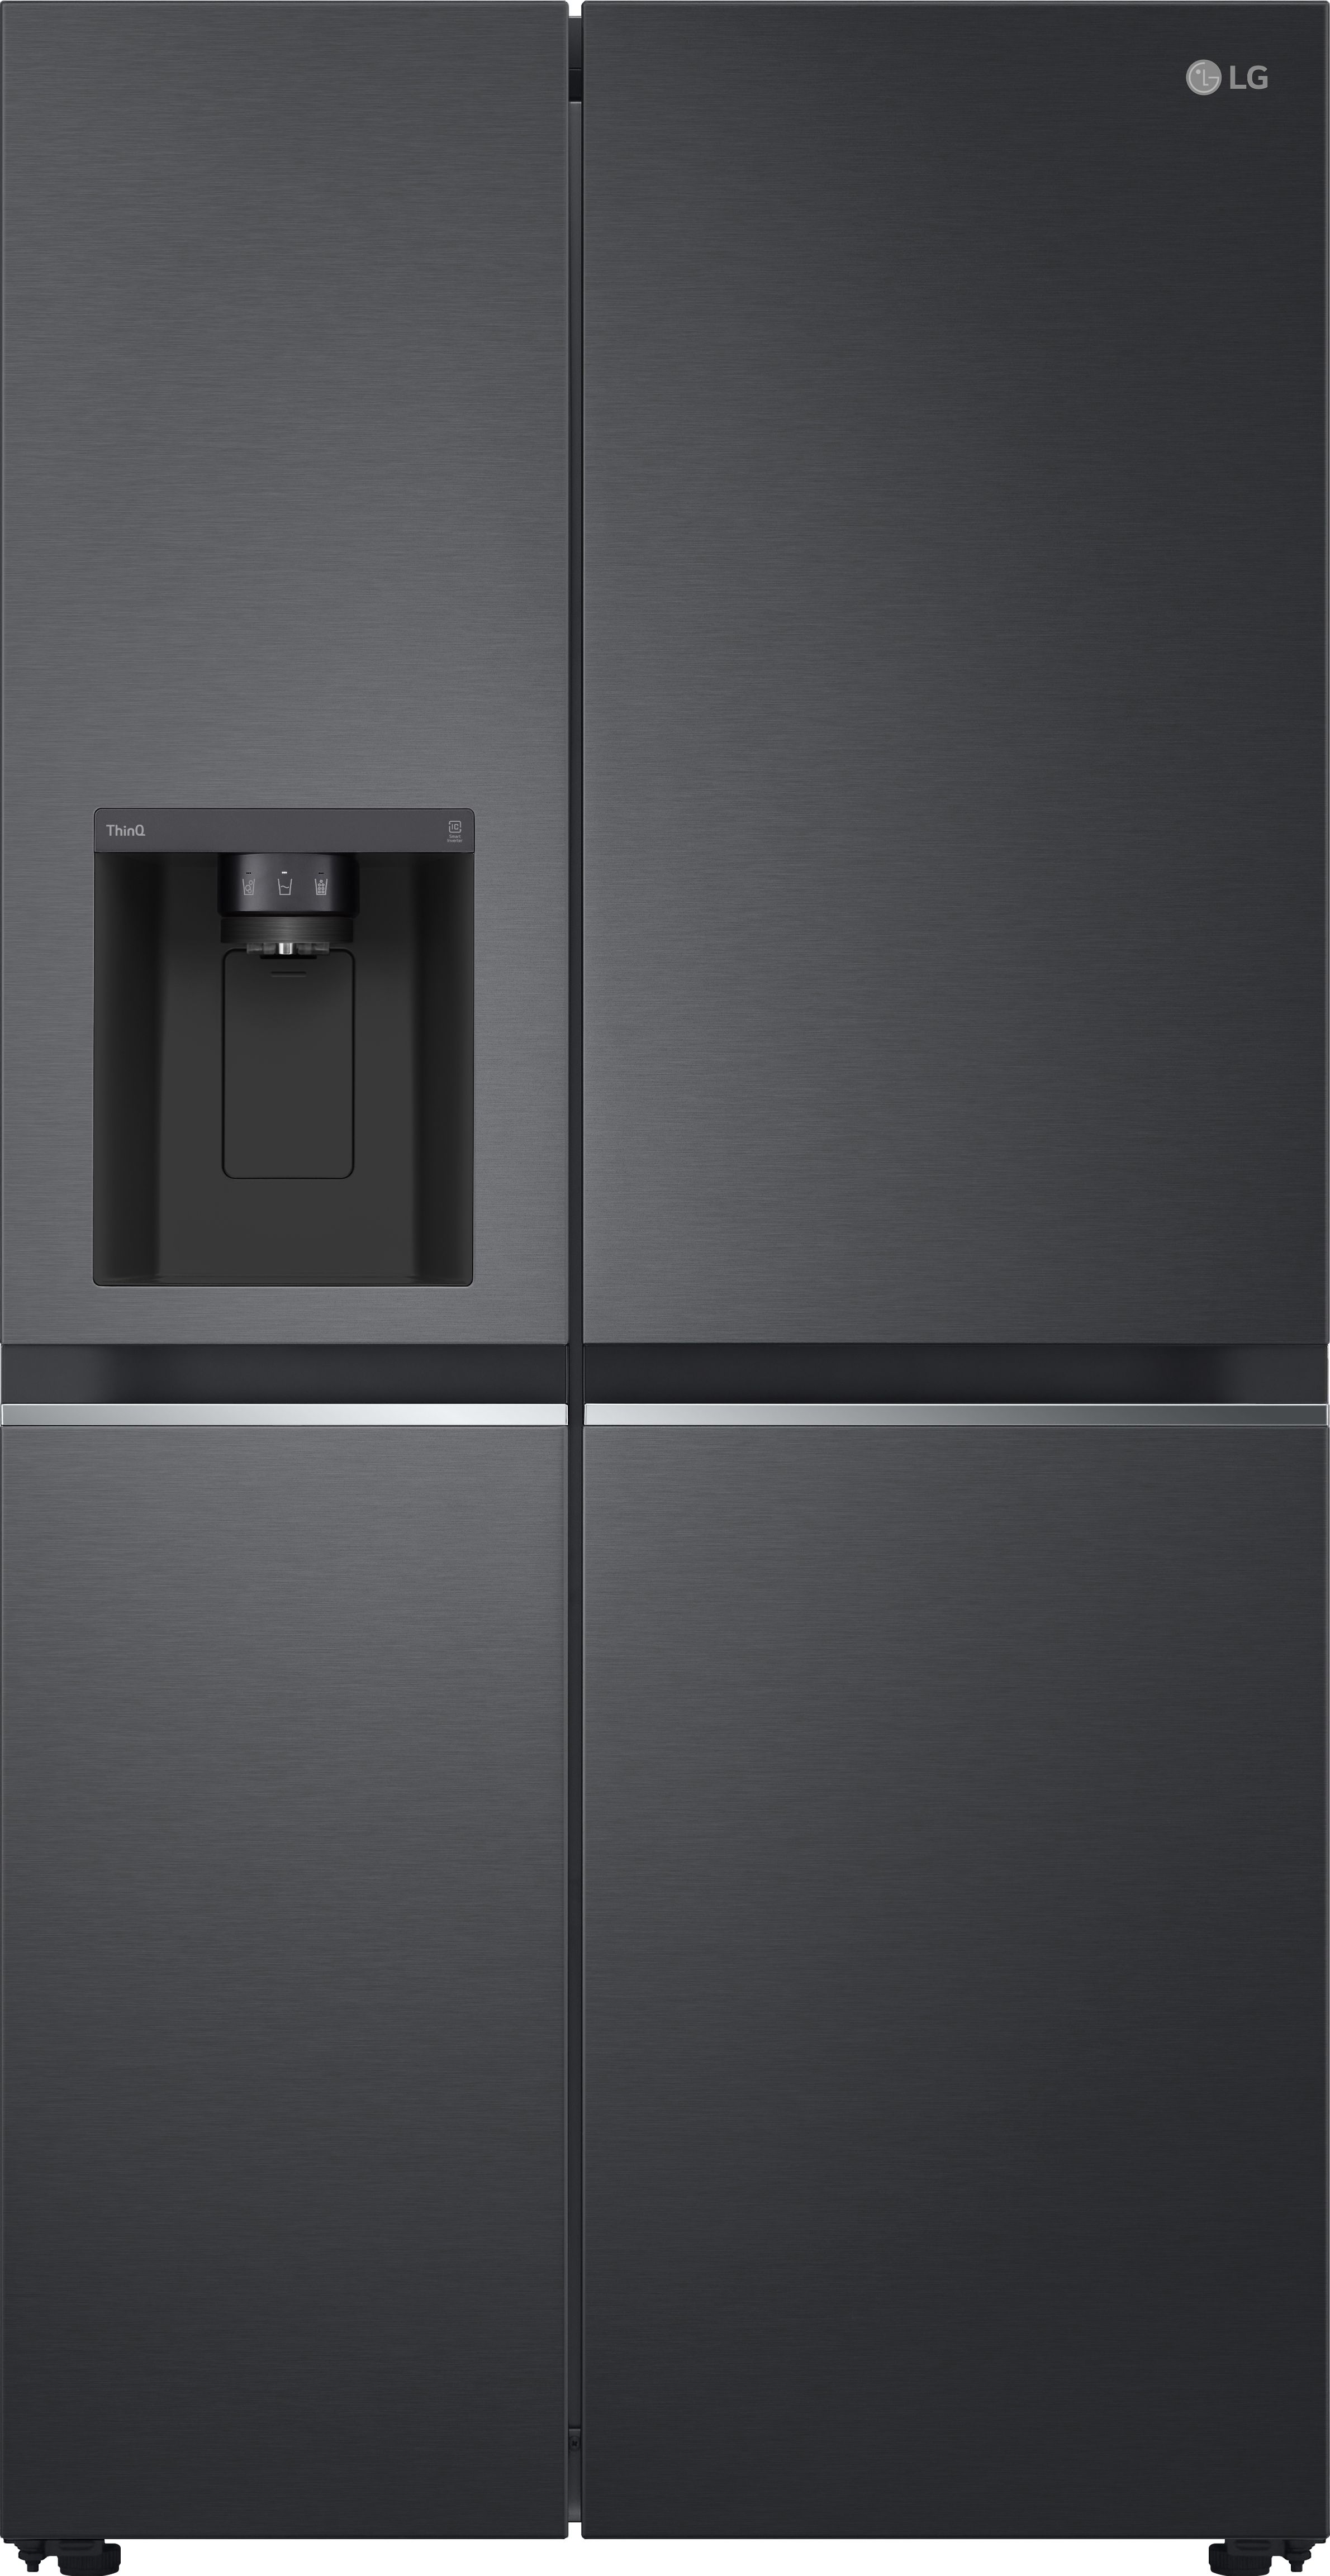 LG NatureFRESH GSLV71MCTD Wifi Connected Non-Plumbed Frost Free American Fridge Freezer - Matte Black - D Rated, Black